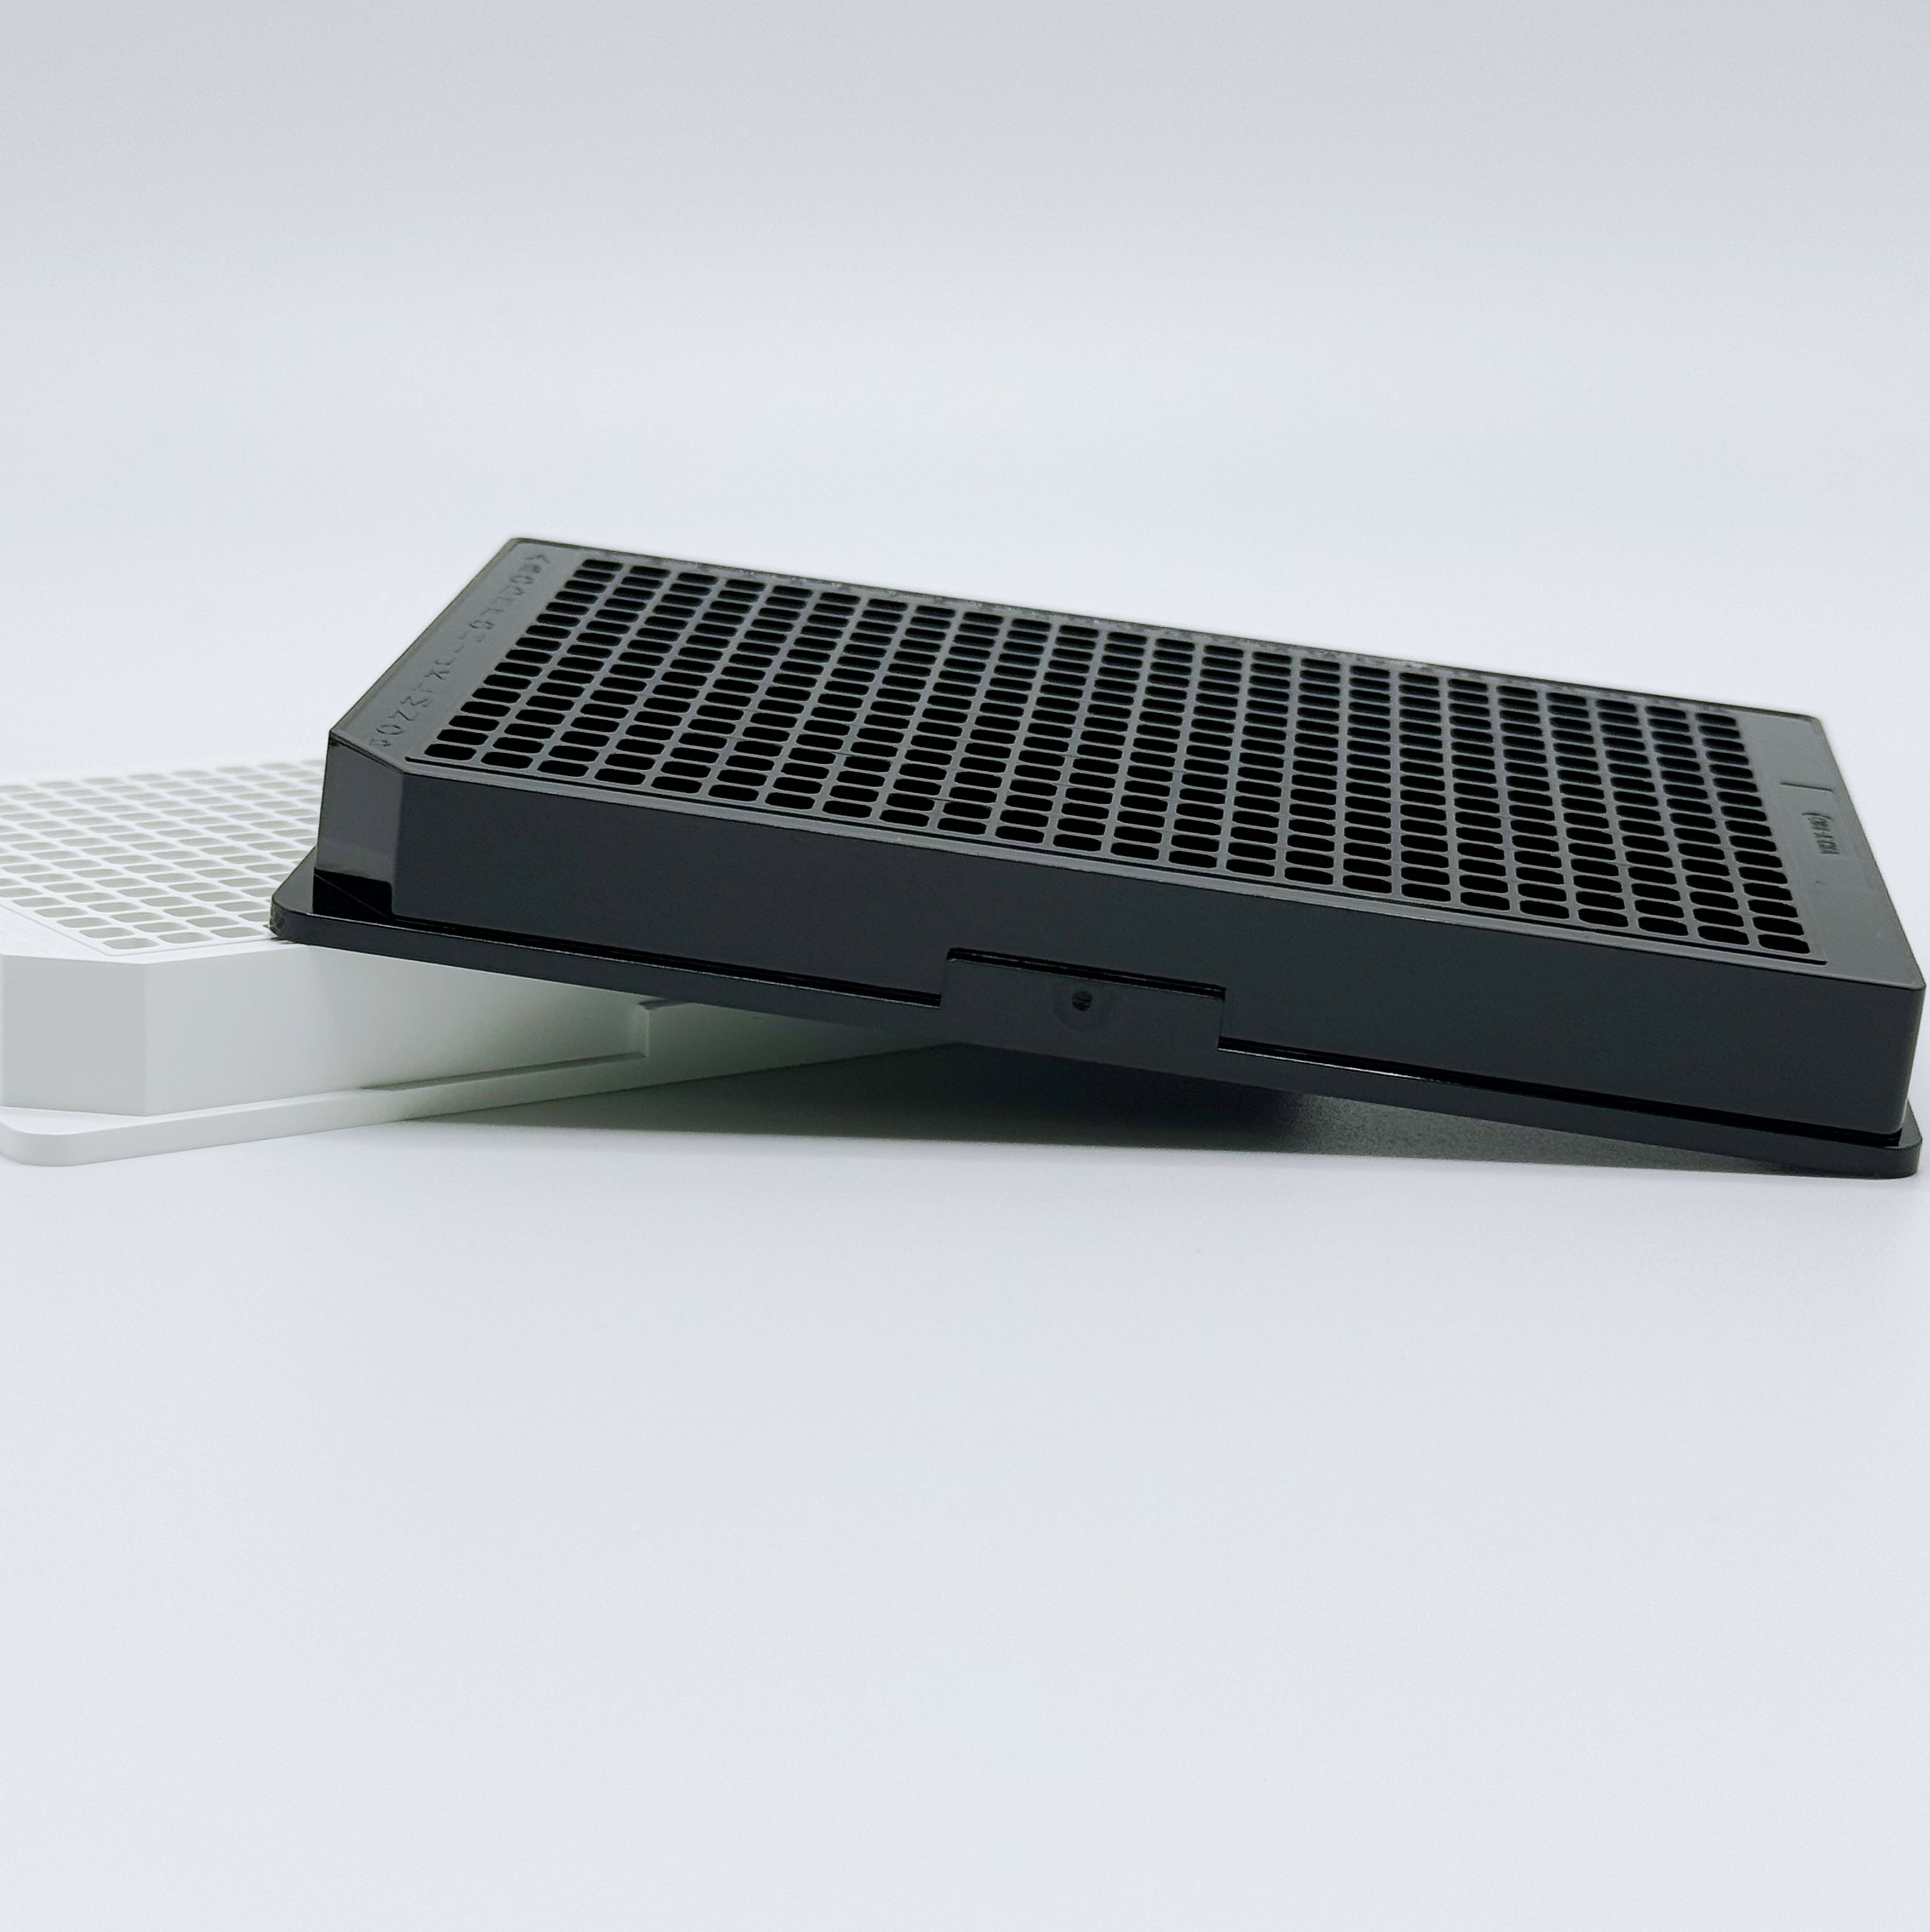 KeyTec® 384-Well Black Flat Microplates, PS, Solid, Non-treated, No lid